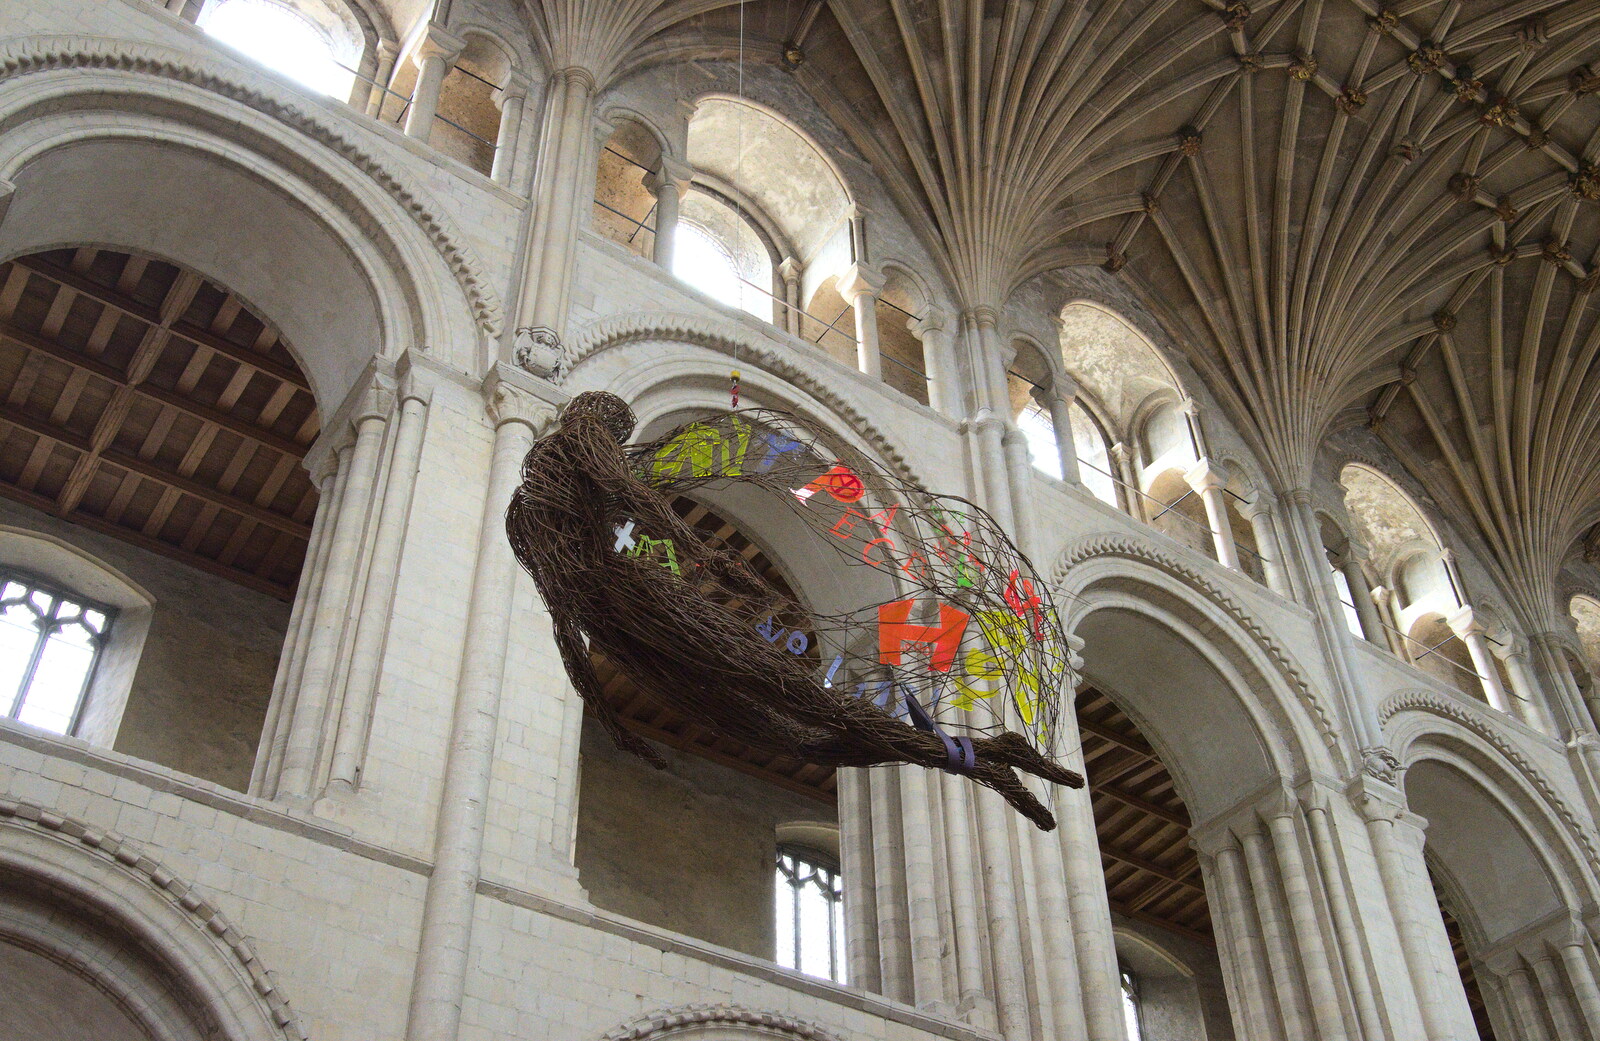 Wicker art in Norwich Cathedral from Discovering the Hidden City: Norwich, Norfolk - 23rd May 2022